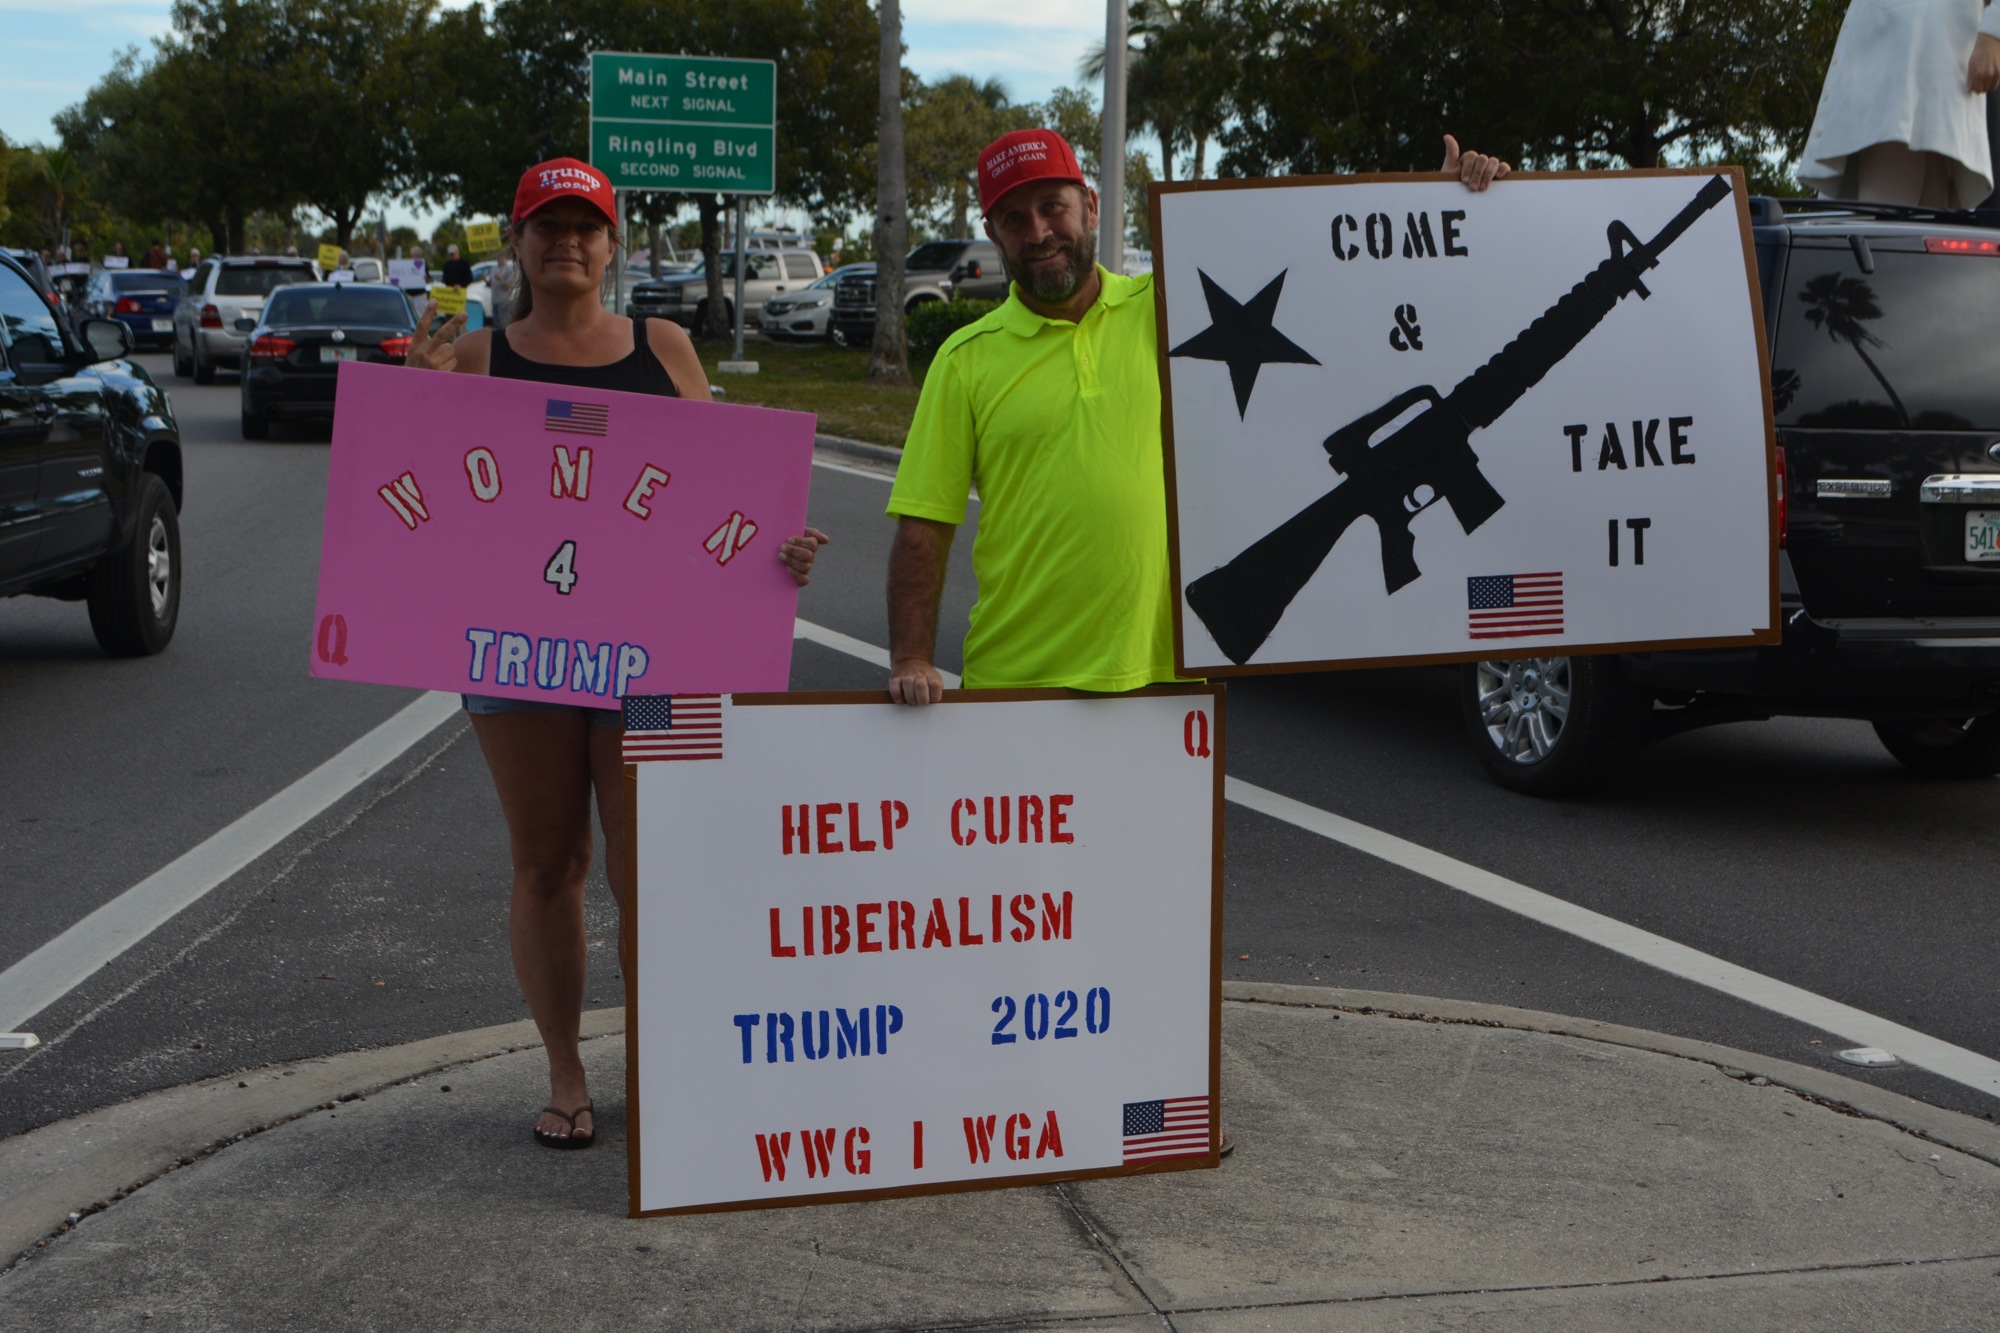 Tom and Susan Caparell hold their signs down the street from the Brady Campaign attendees.